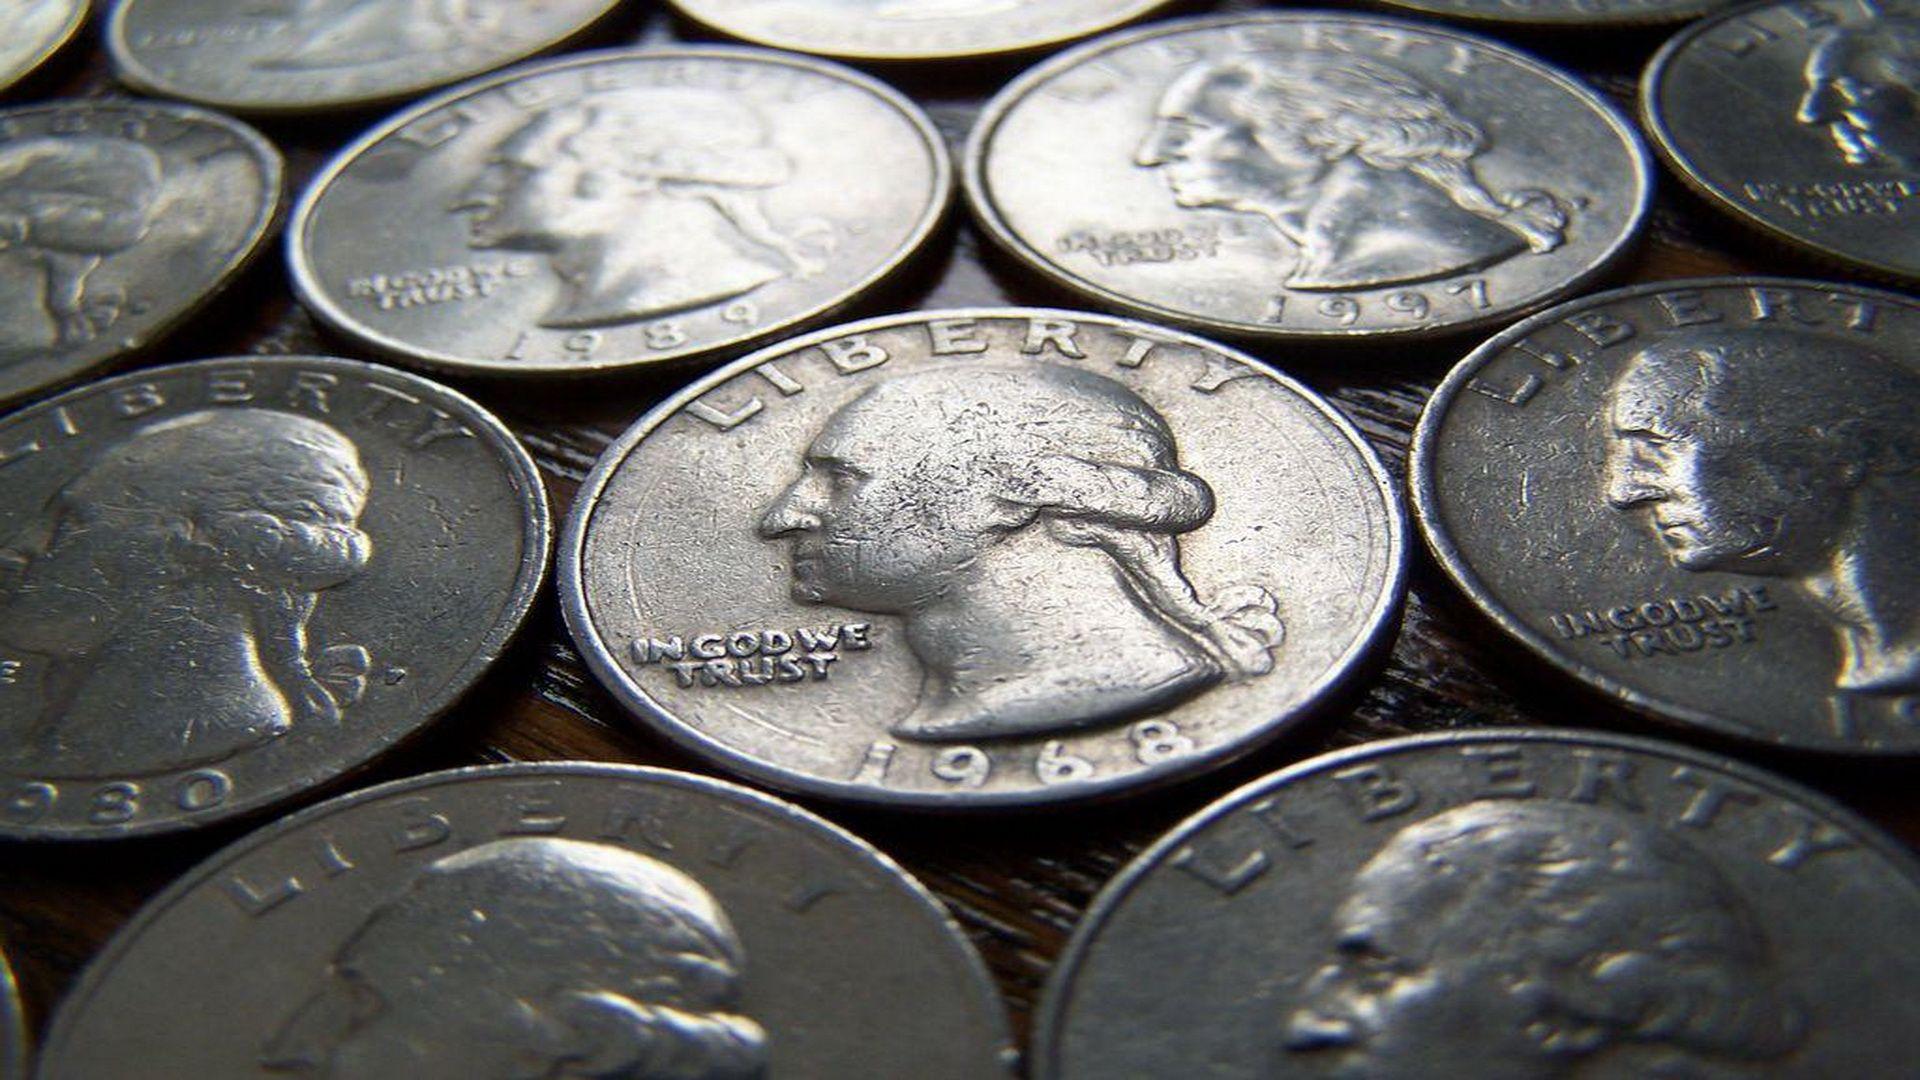 Pictures of Money: Awesome Pics of Money | American Quarters Close Up